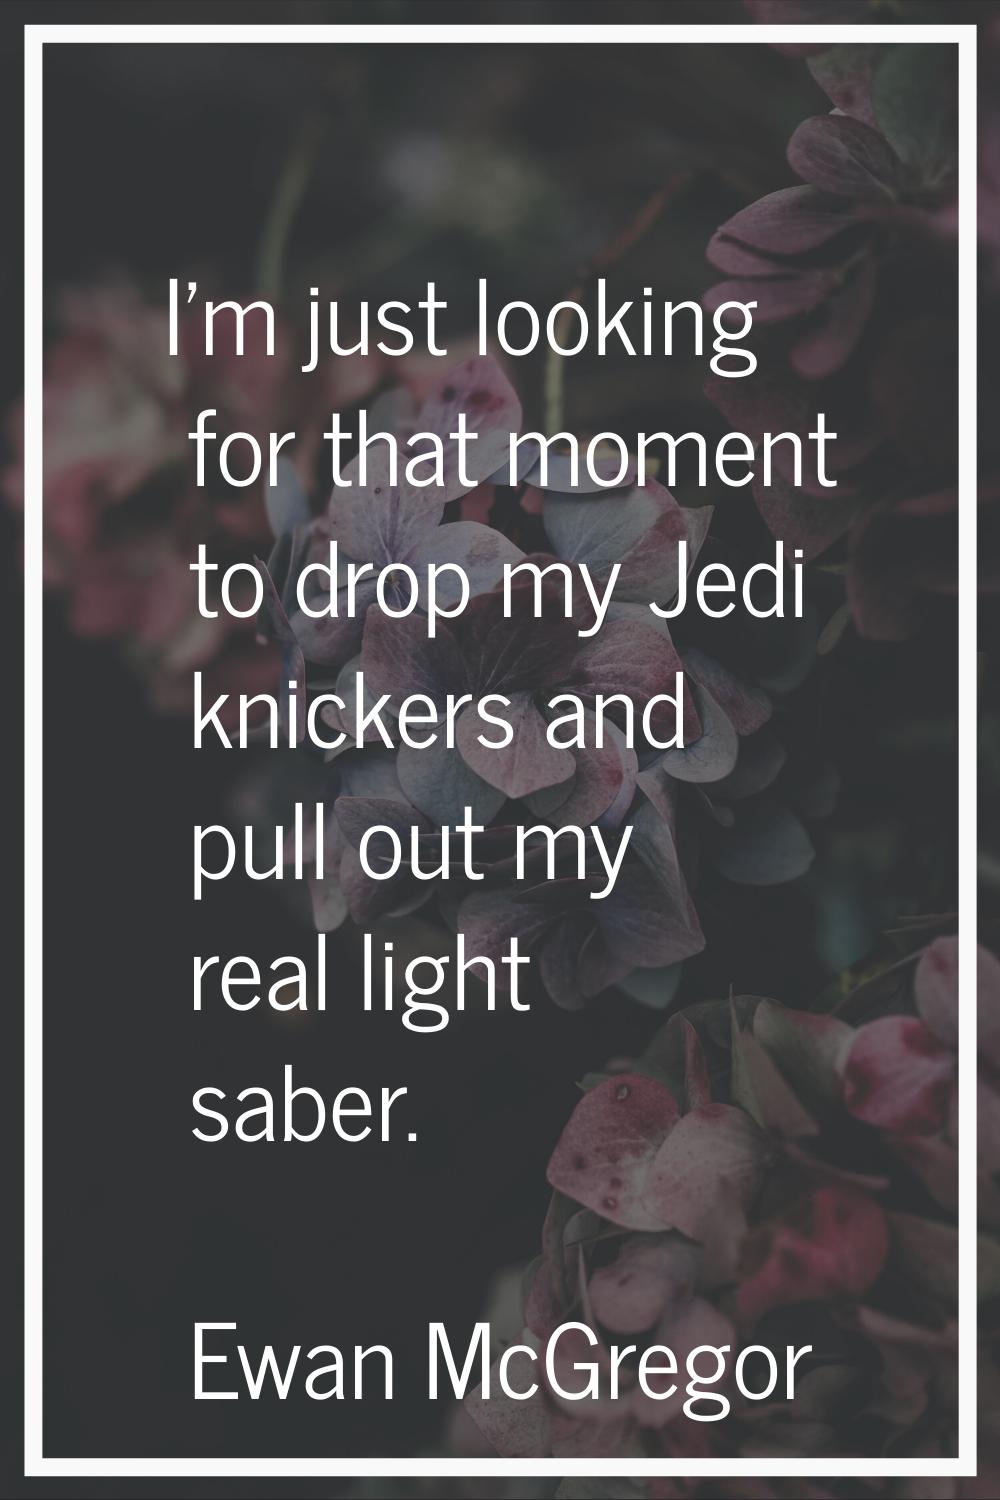 I'm just looking for that moment to drop my Jedi knickers and pull out my real light saber.